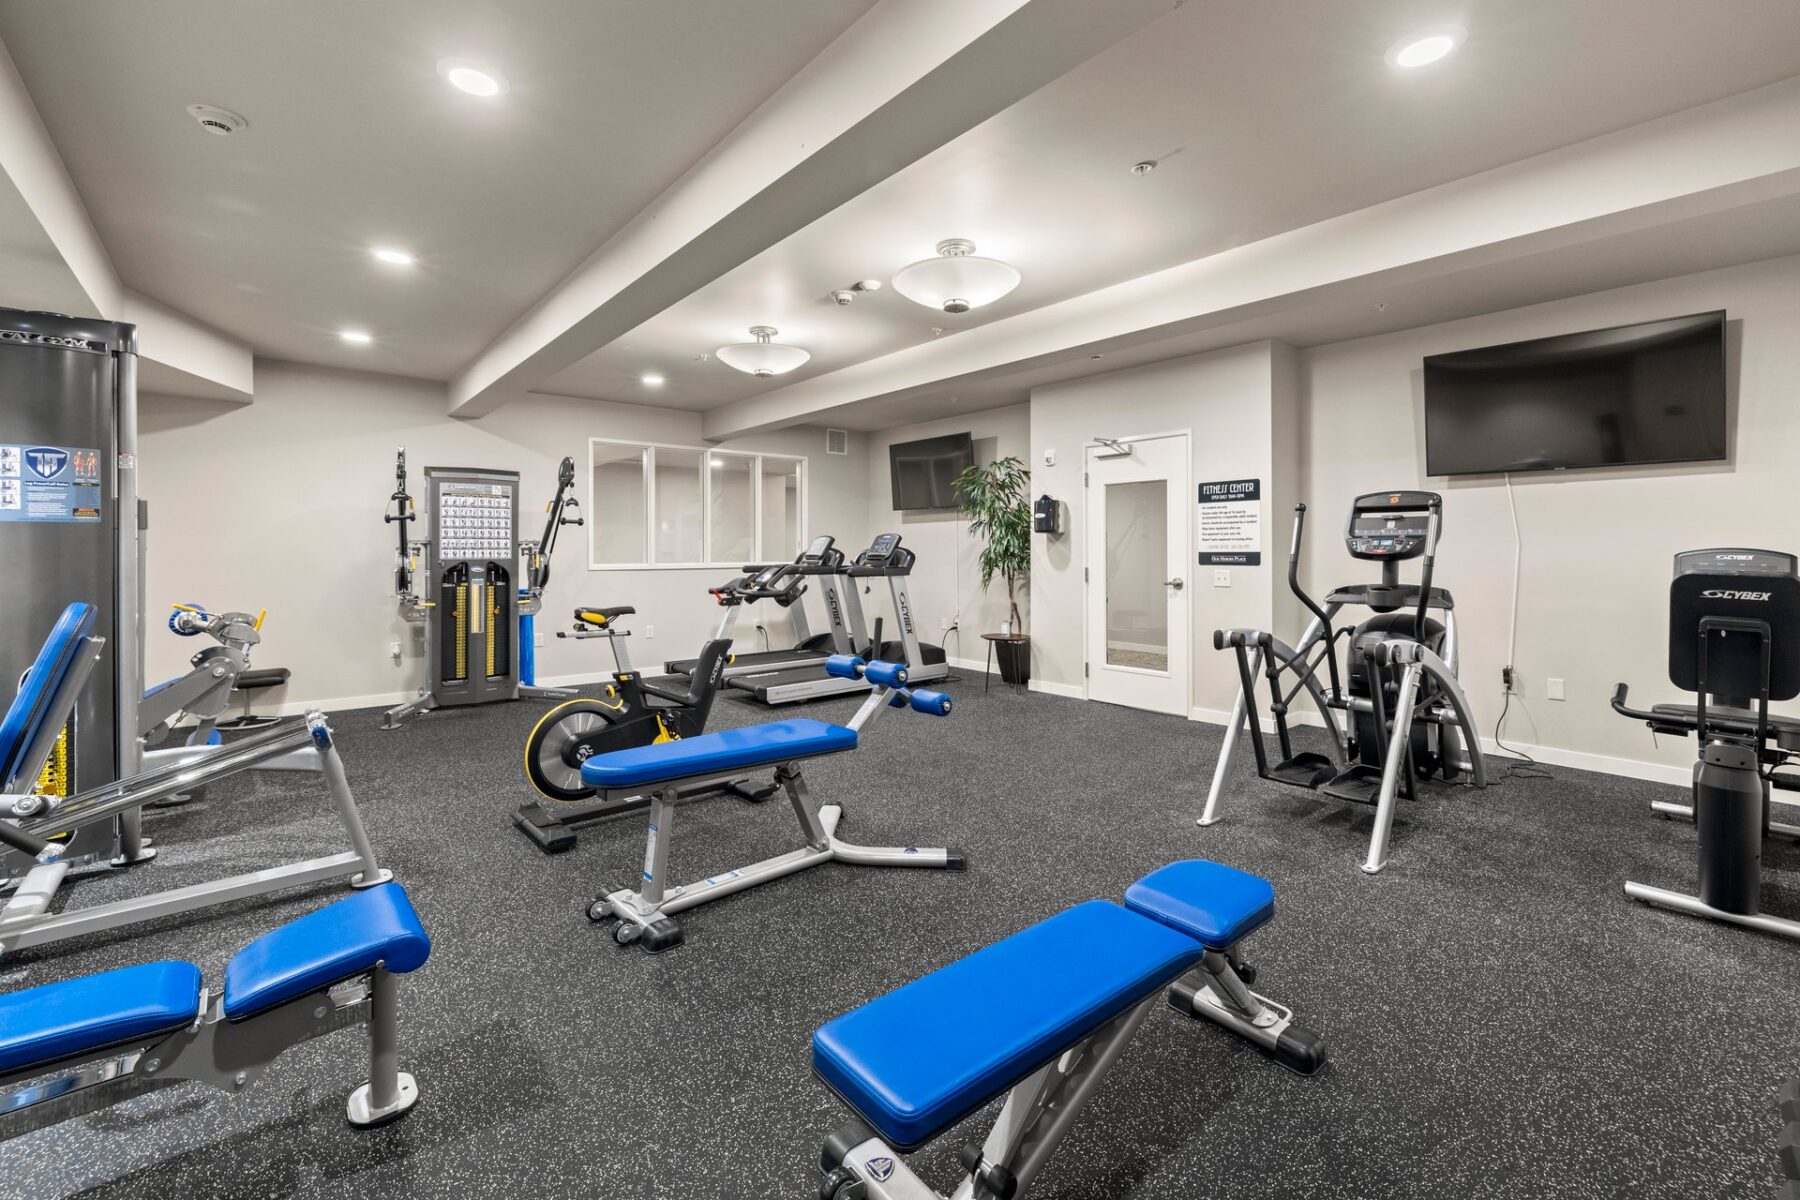 fitness center with strength machines, cardio machines, and mounted televisions